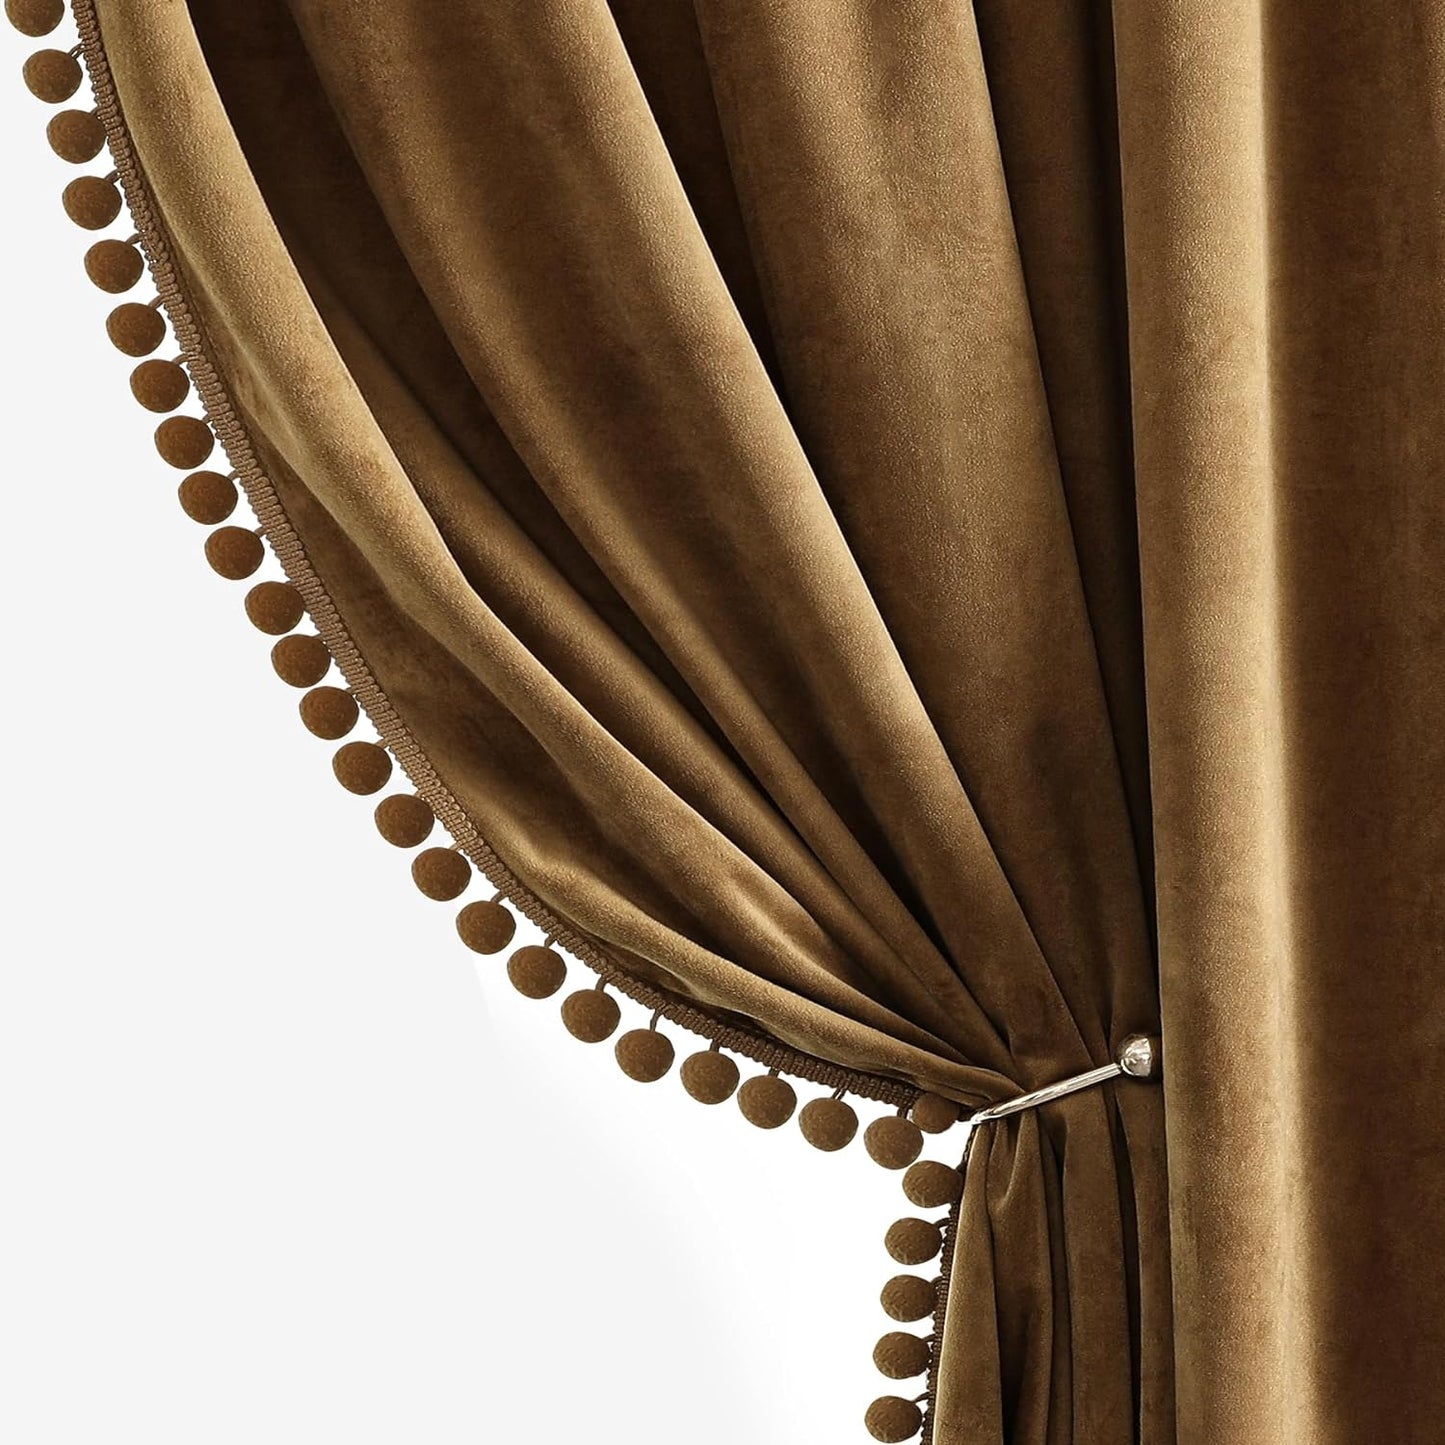 Dchola Olive Green Velvet Curtains for Bedroom Window, Super Soft Vintage Luxury Heavy Drapes, Room Darkening Rod Pocket Curtain for Living Room, W52 by L84 Inches, 2 Panels  Dchola Pom-Gold Brown W52*L108 